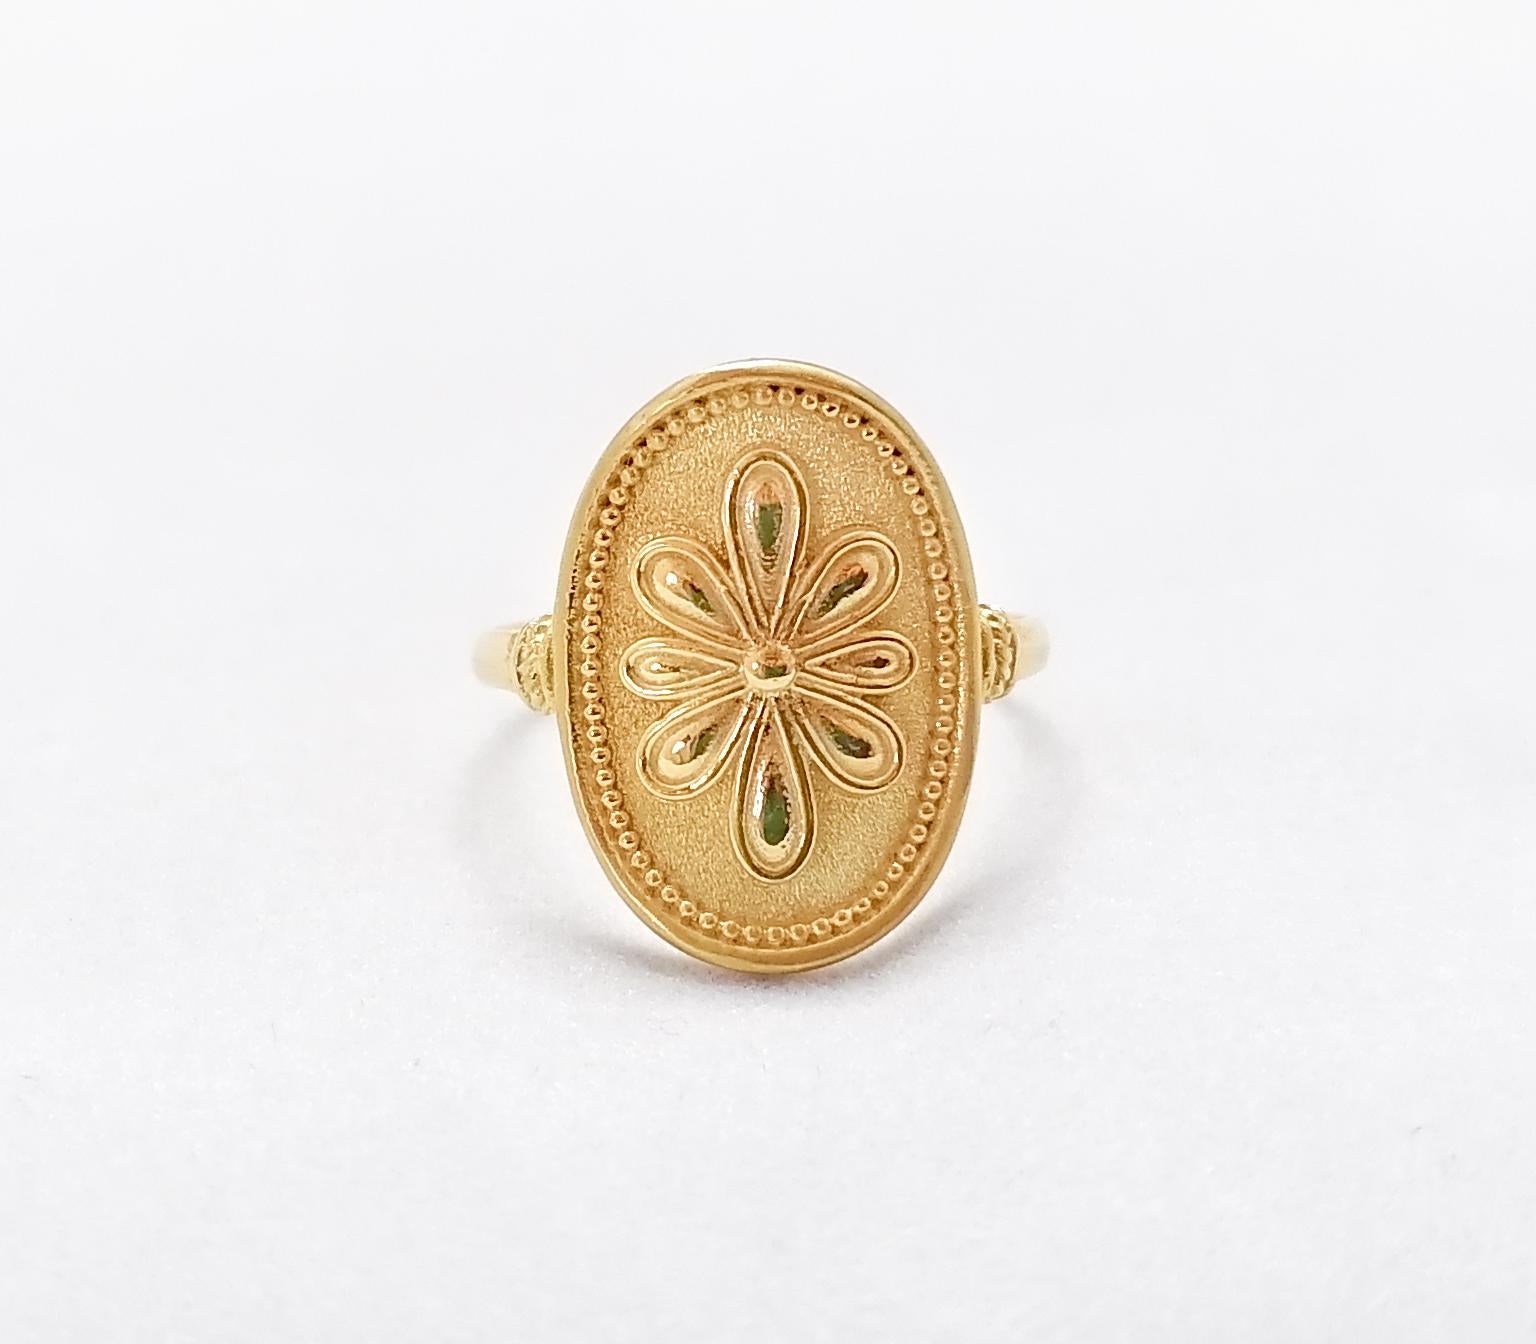 This S.Georgios designer ring is handmade from solid 18 Karat Yellow Gold. This gorgeous oval ring is microscopically decorated with Byzantine-style granulation work to create a stunning and elegant floral art piece.
We also make this beautiful ring